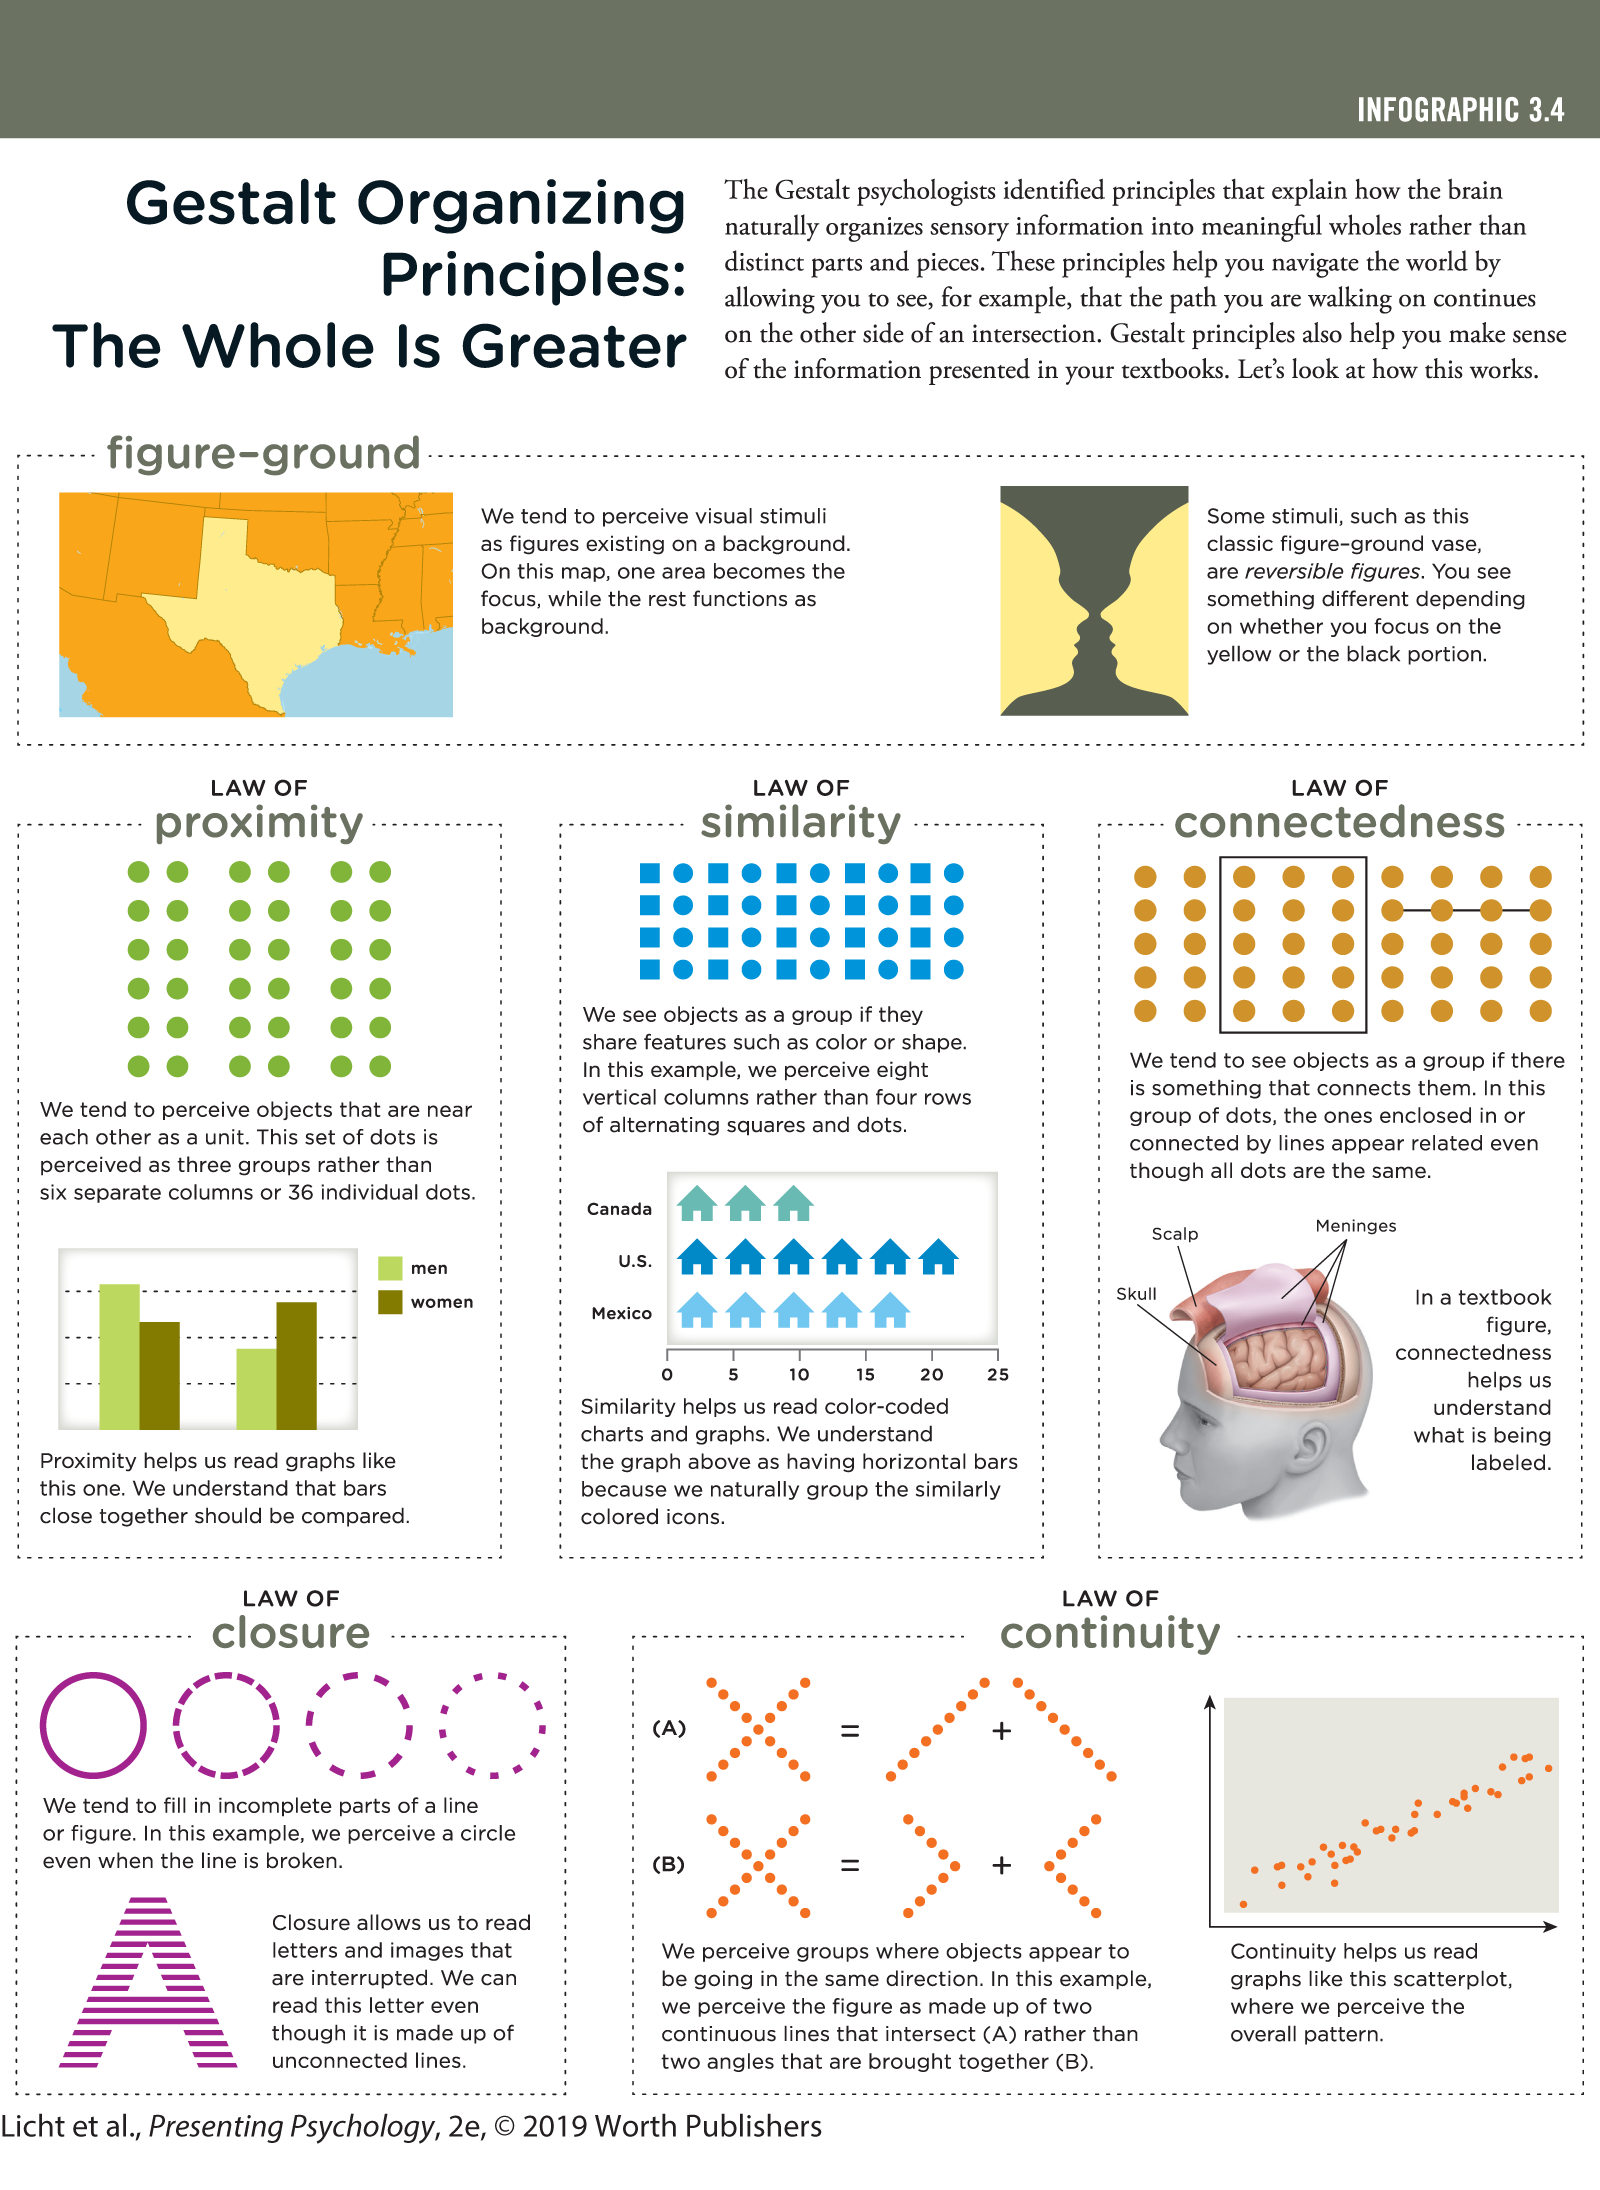 An infographic titled, Gestalt Organizing Principles: The Whole is Greater shows six frames, each explaining a visual perception. You can read full description from the link below